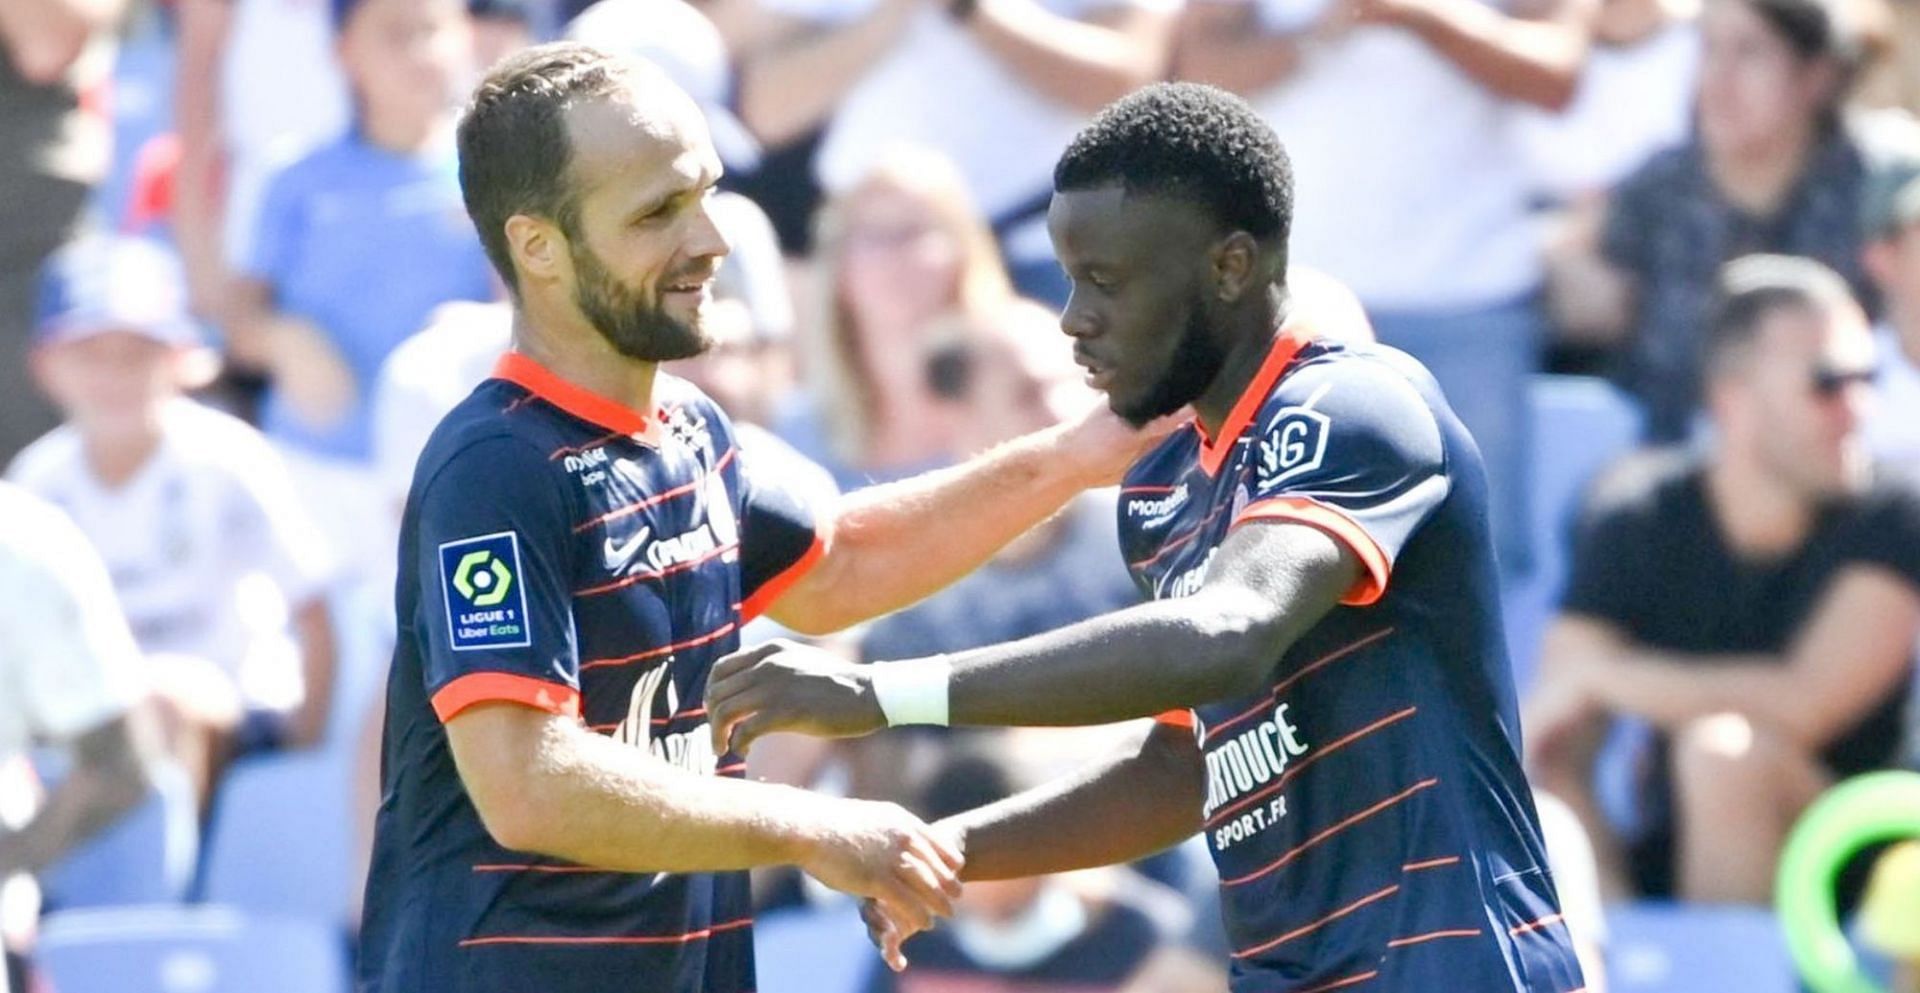 Can Montpellier topple an in-form Lens side this weekend?